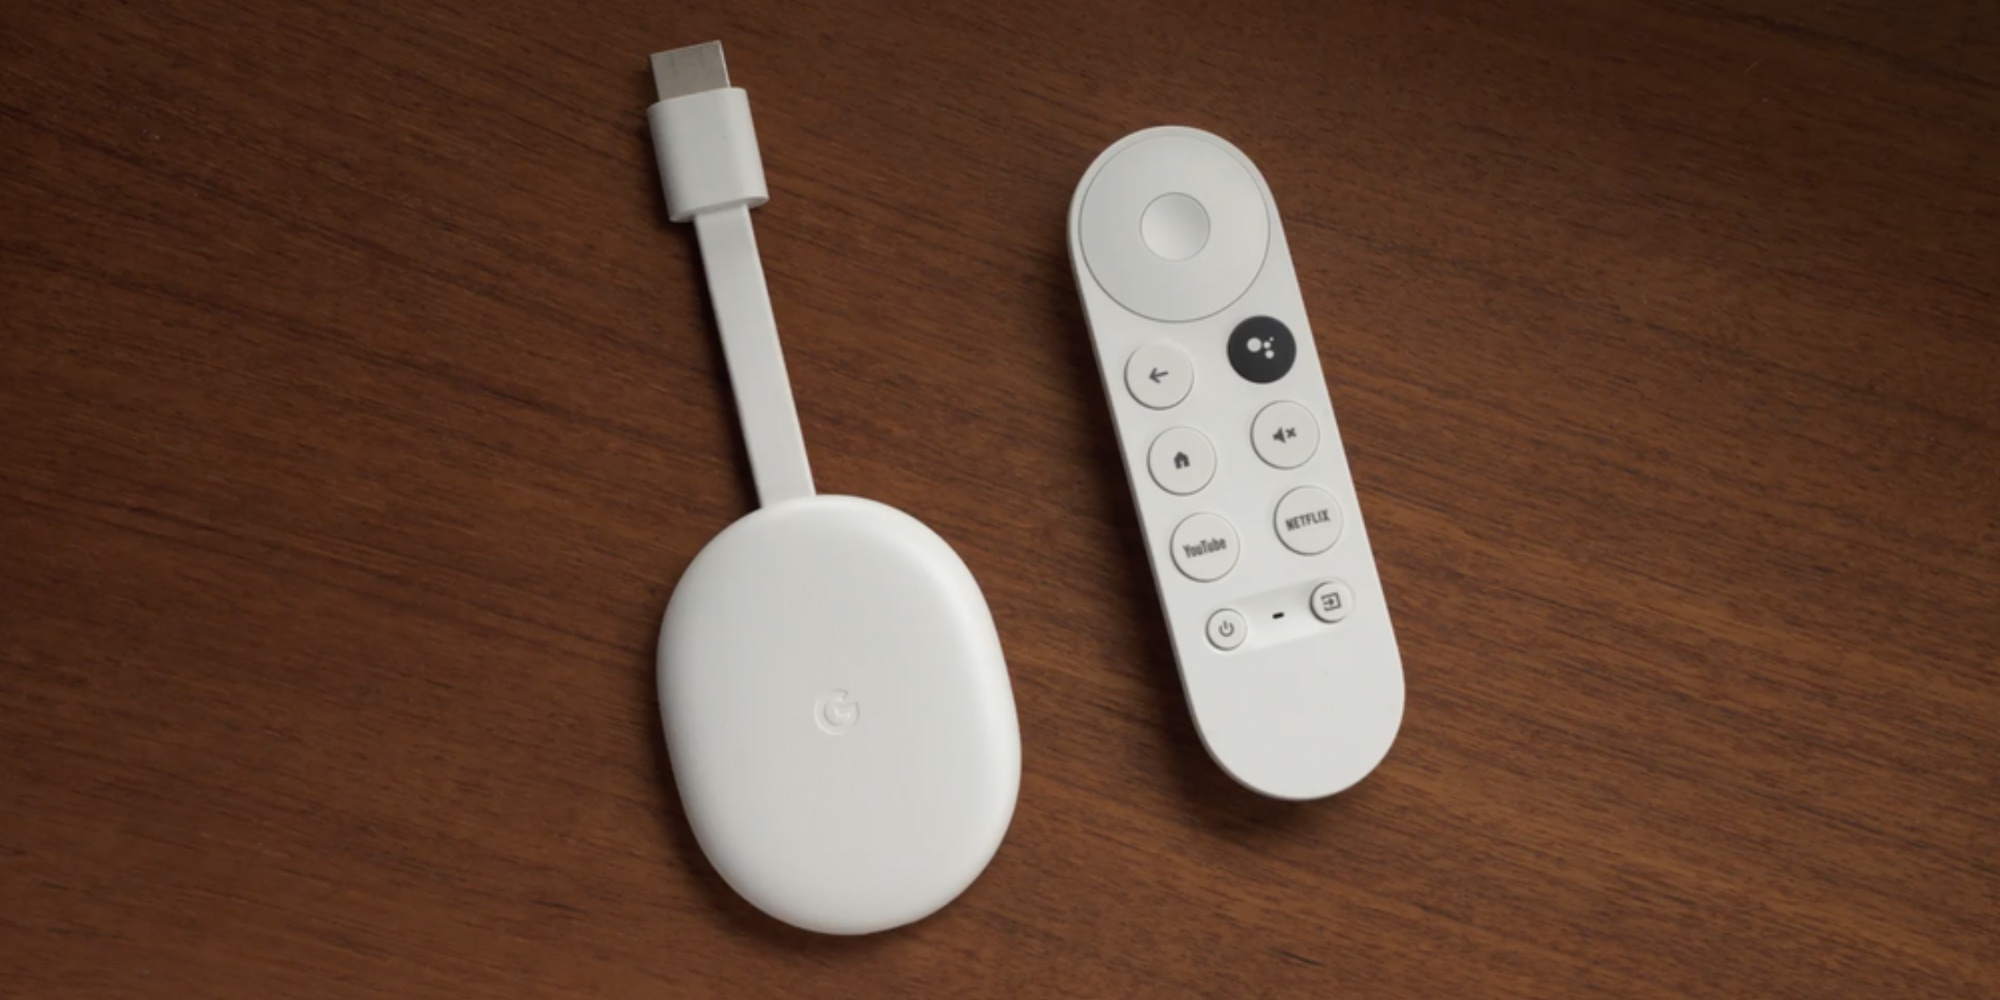 will tunify work with chromecast